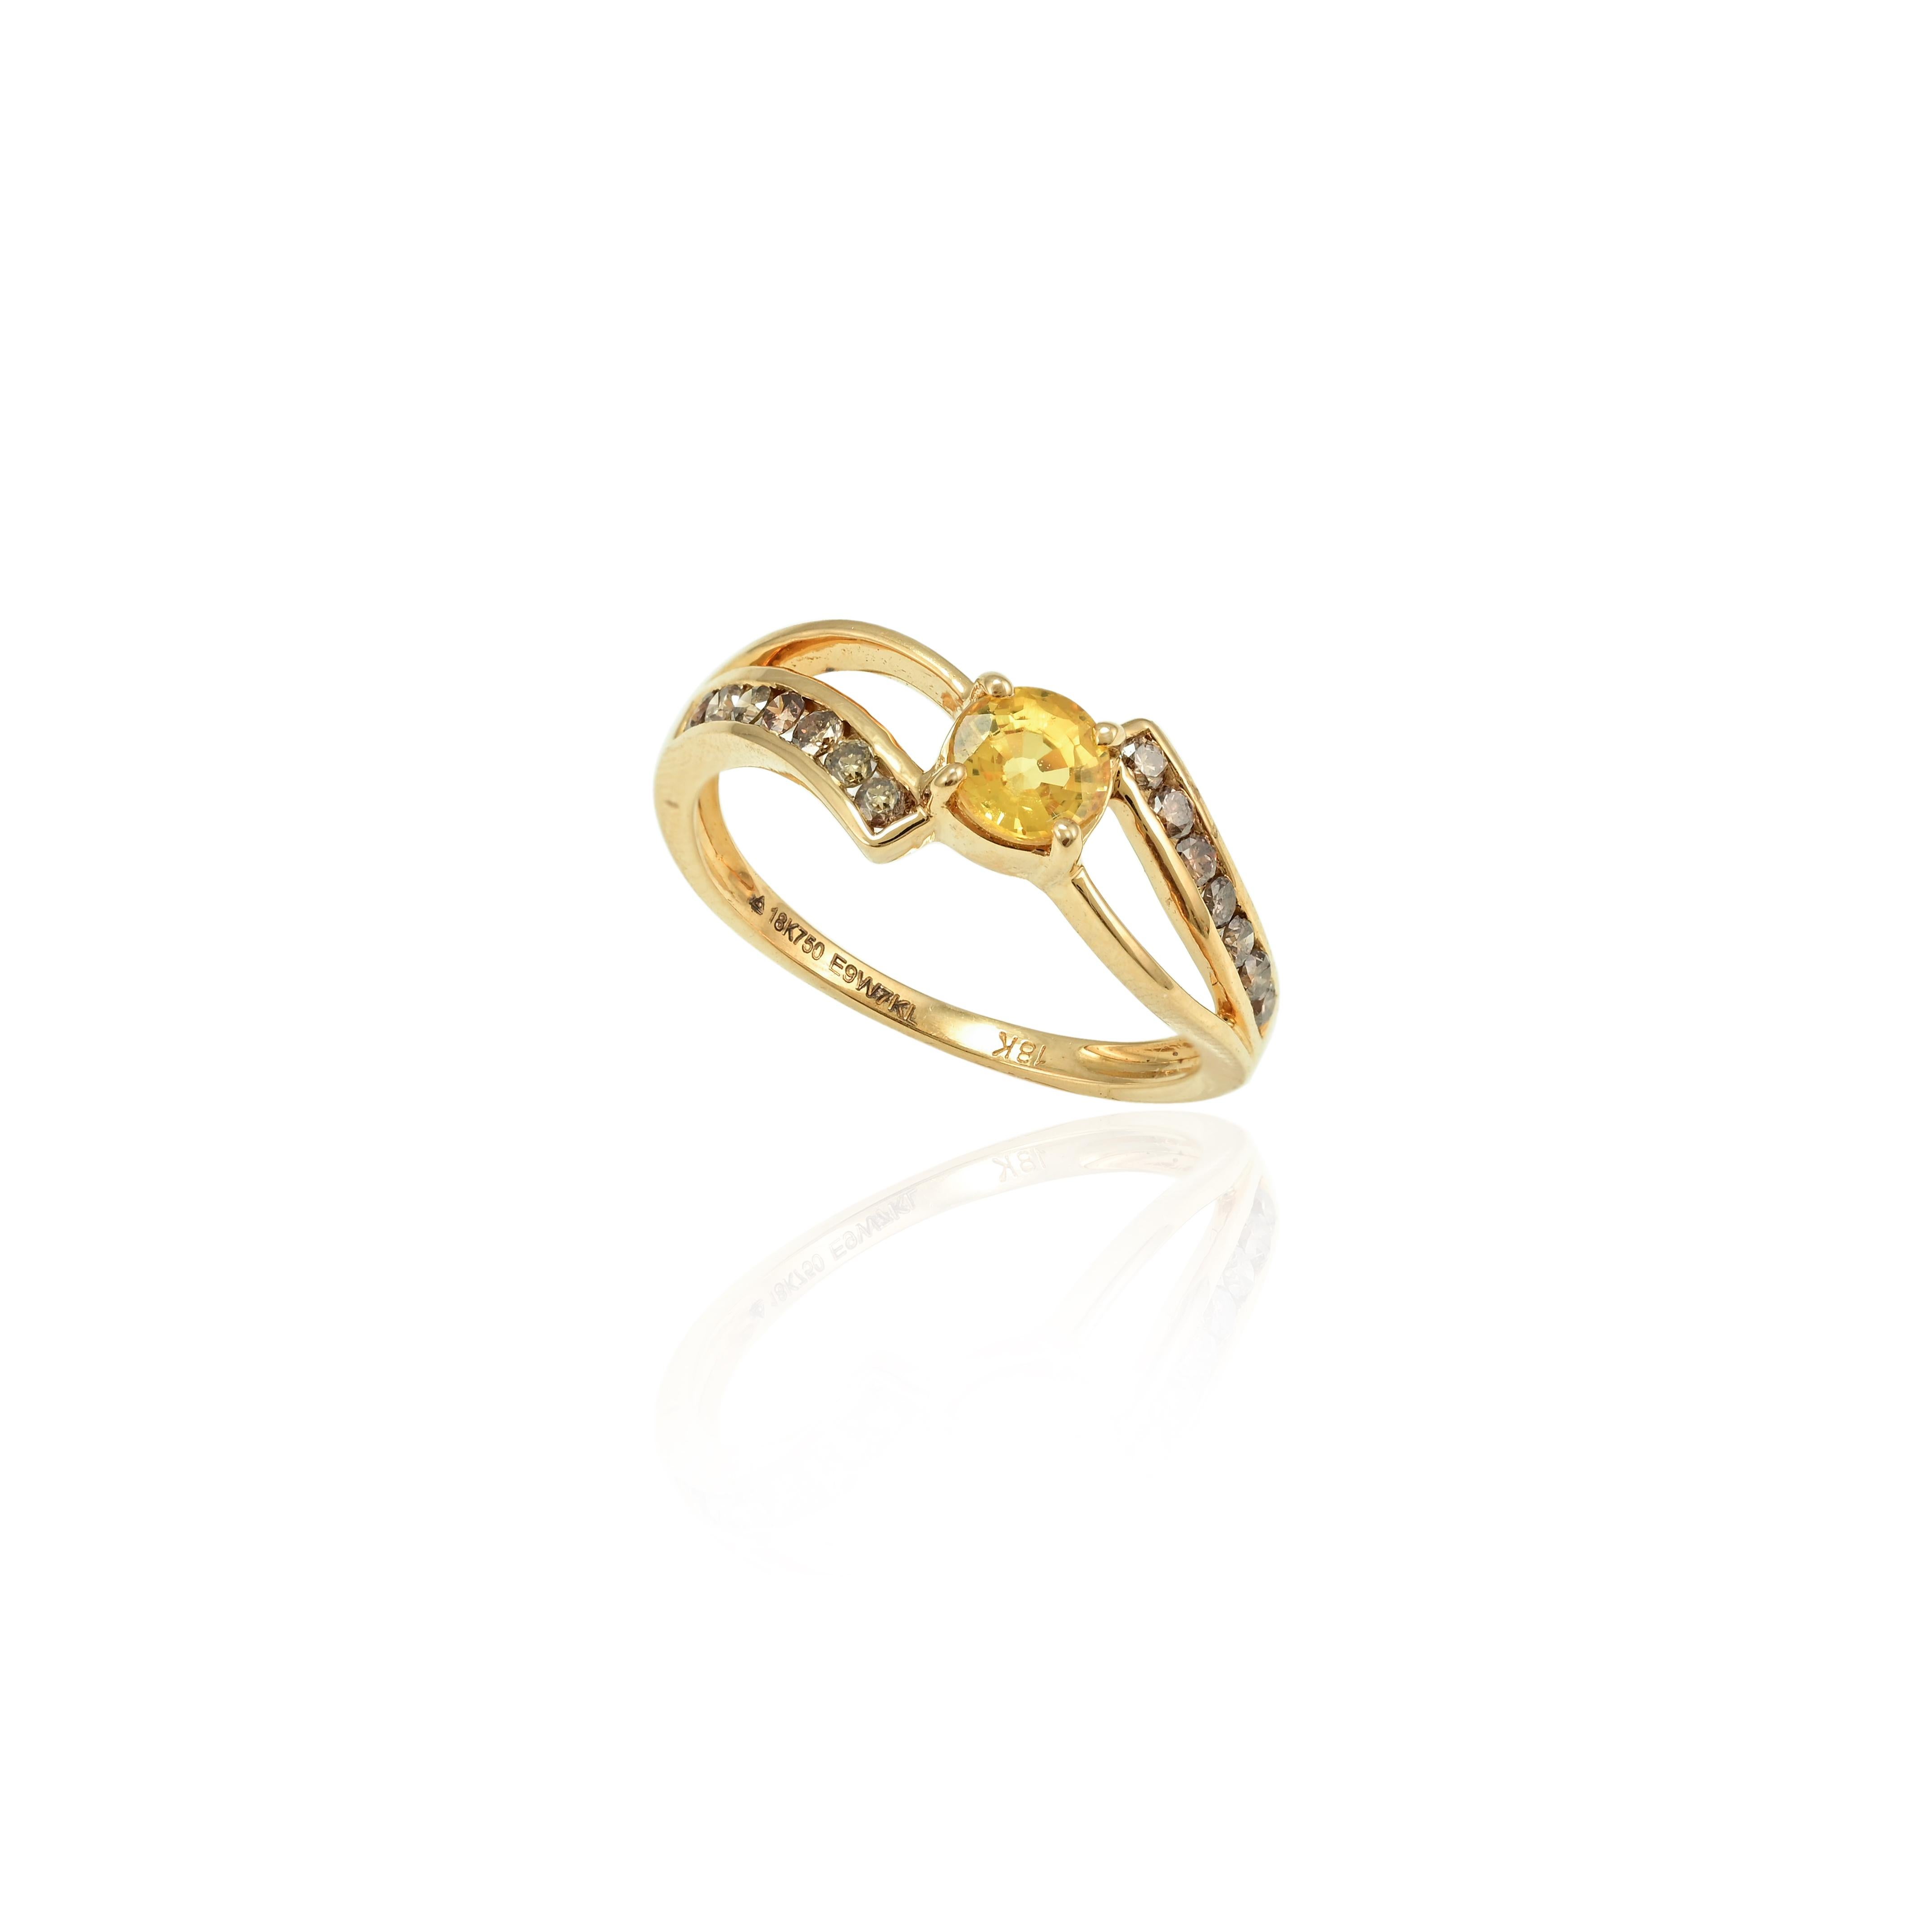 For Sale:  Certified Yellow Sapphire Ring with Diamonds in 18k Solid Yellow Gold 7